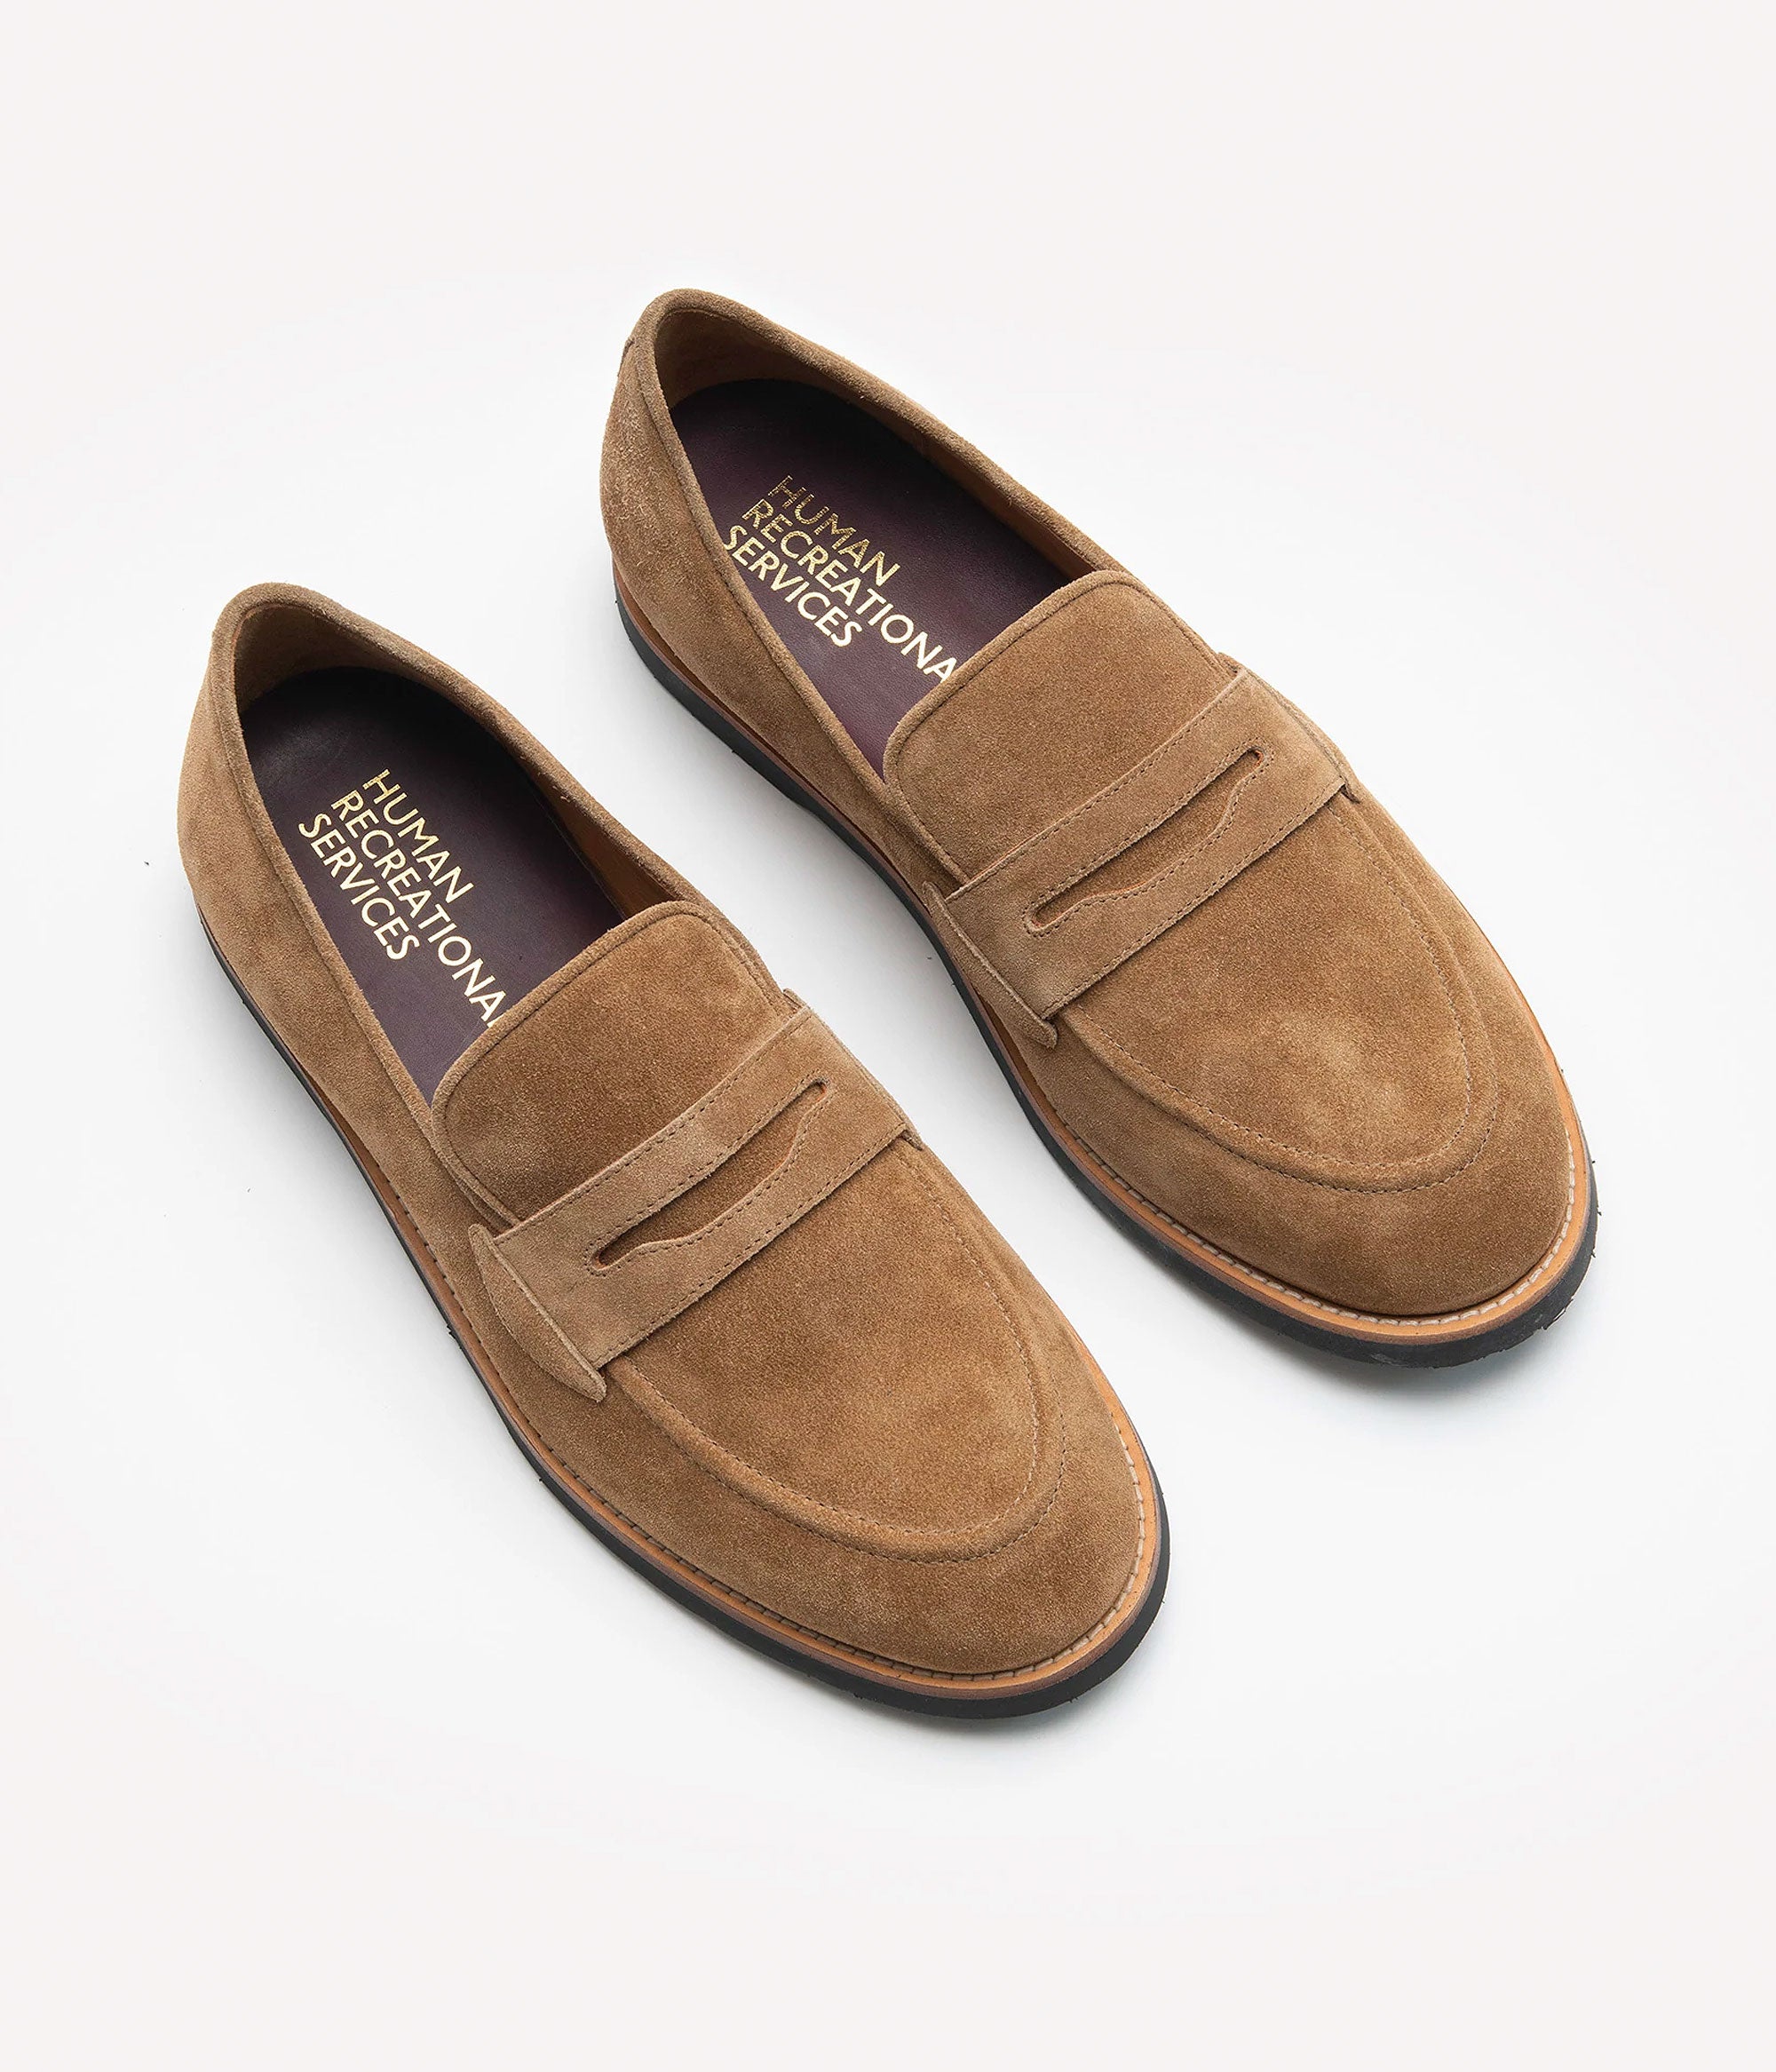 DEL REY PENNY LOAFER TUSCAN TAN